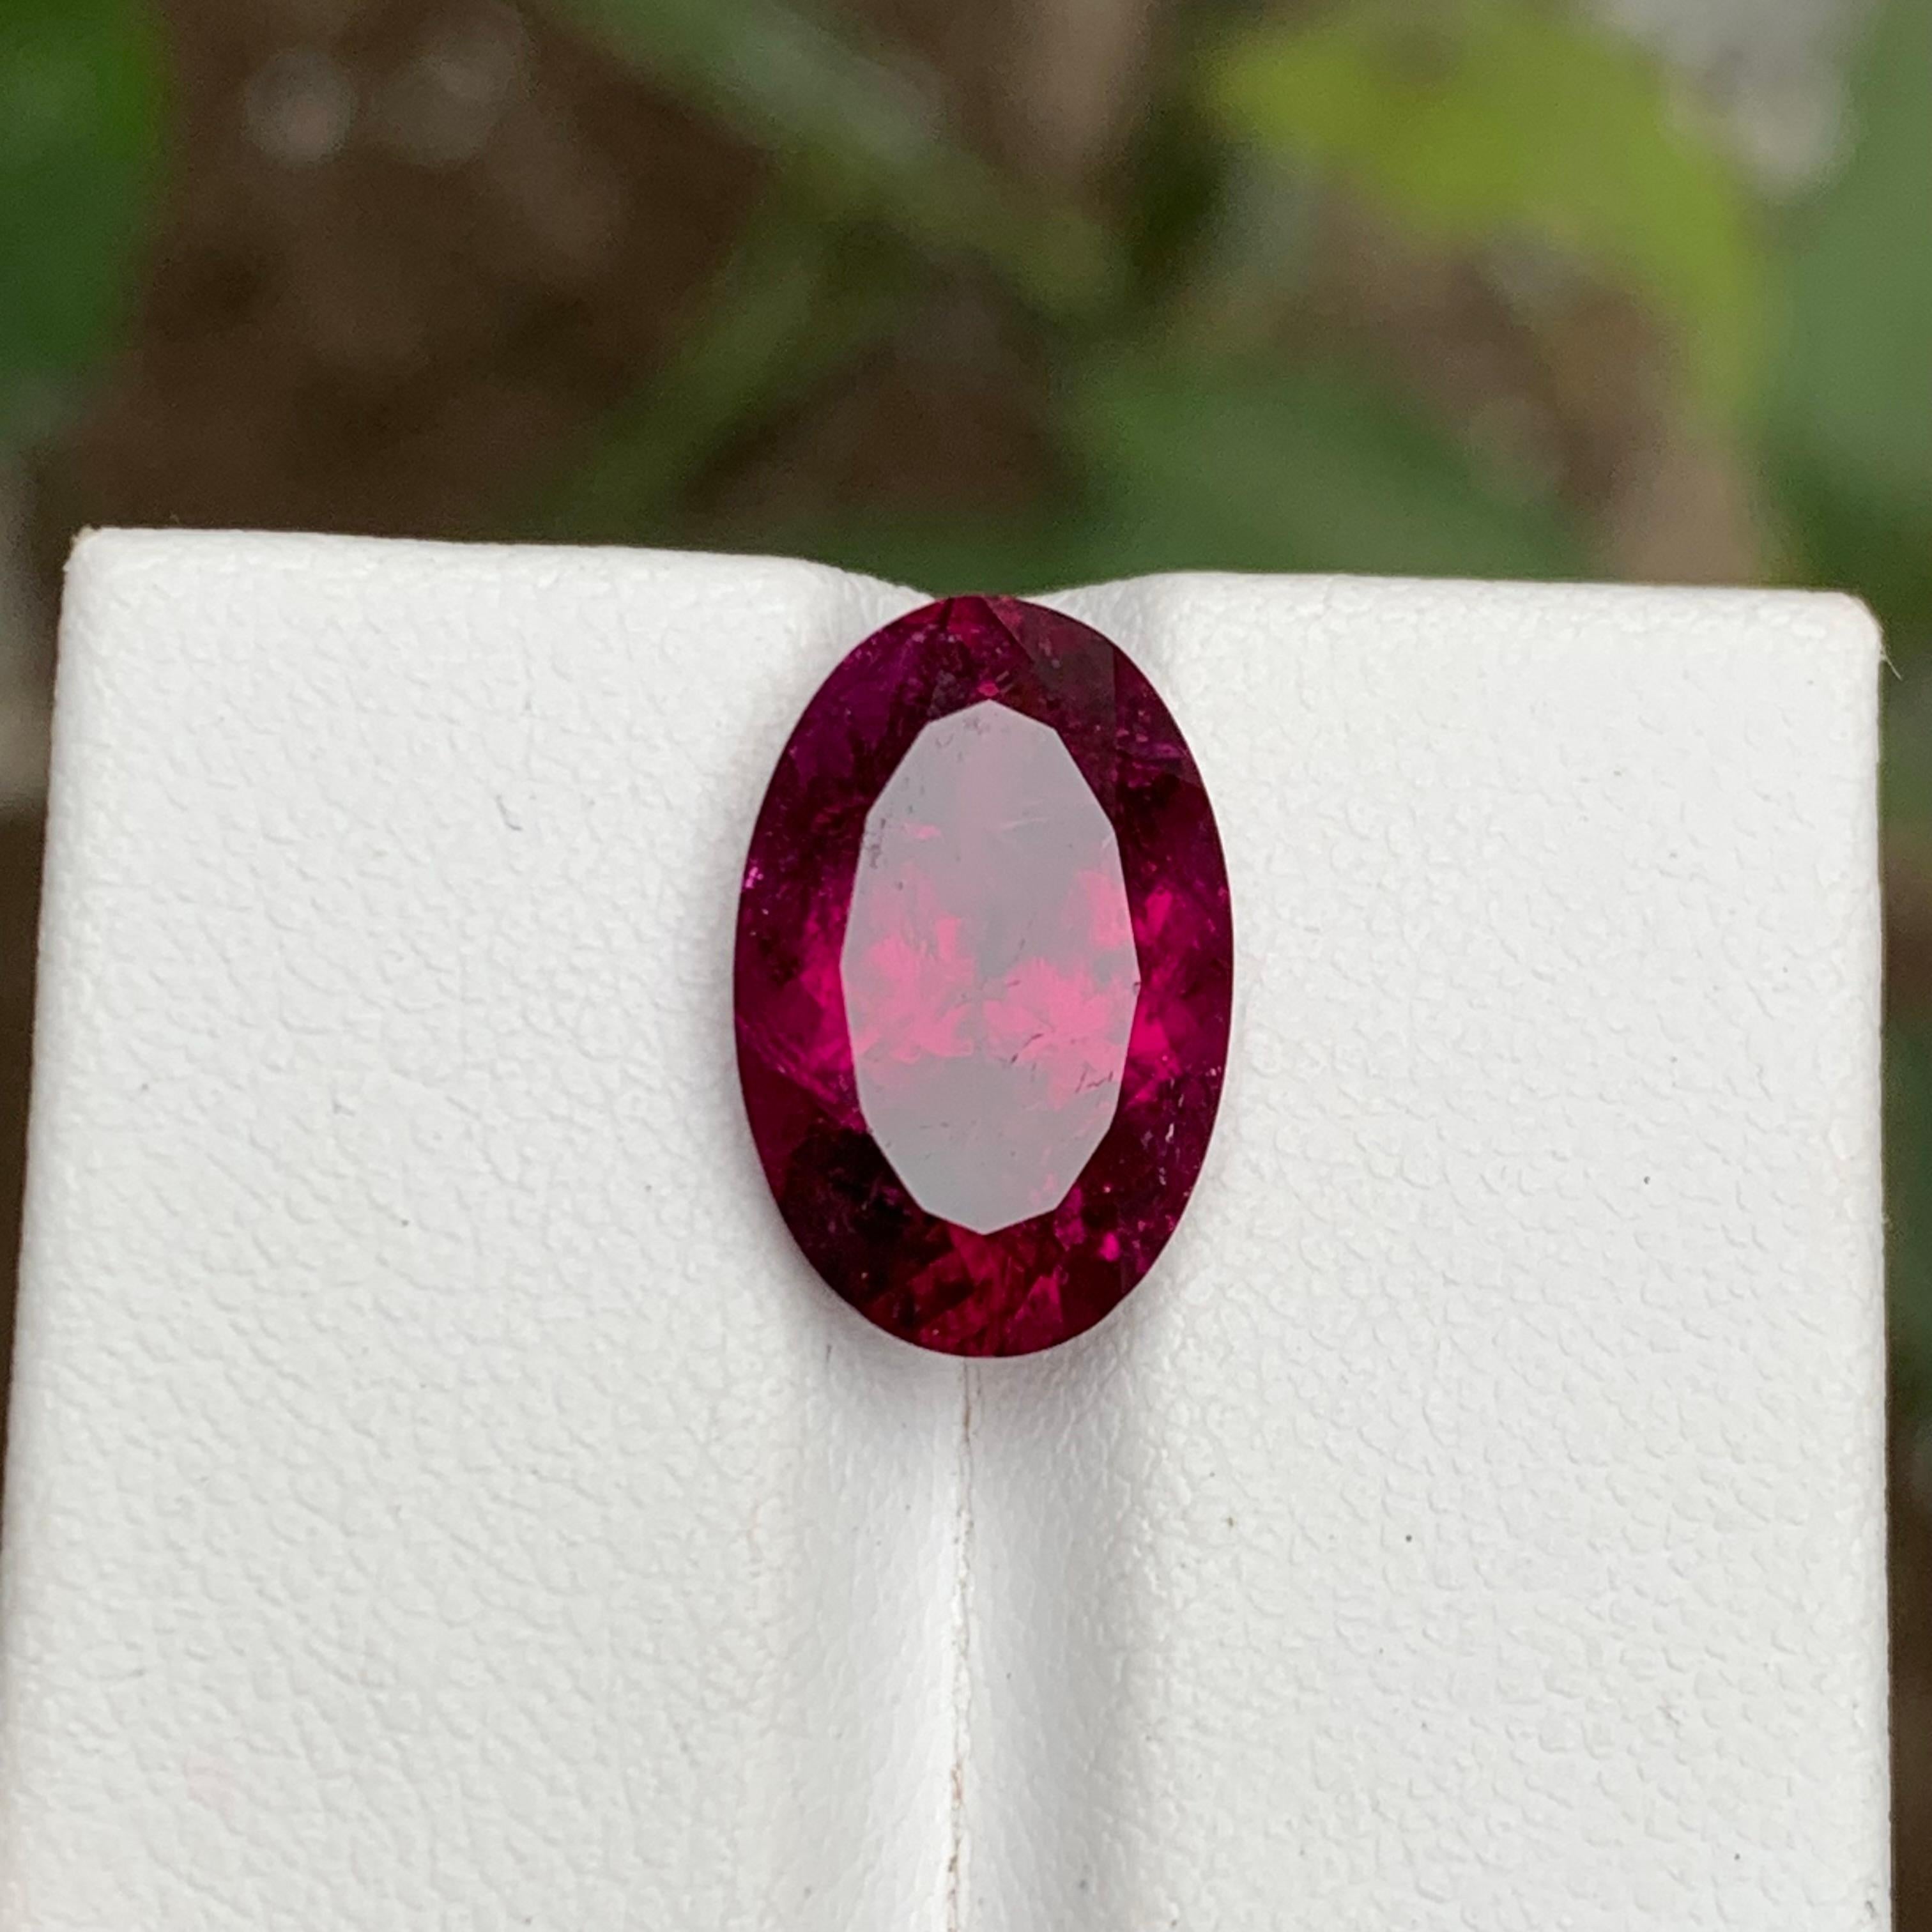 GEMSTONE TYPE: Rubellite Tourmaline
PIECE(S): 1
WEIGHT: 5.80 Carats
SHAPE: Oval Cushion 
SIZE (MM): 14.69 x 9.59 x 6.49
COLOR: Purplish Pink with Red Hues
CLARITY: Moderately Included 
TREATMENT: Heated
ORIGIN: Afghanistan
CERTIFICATE: On